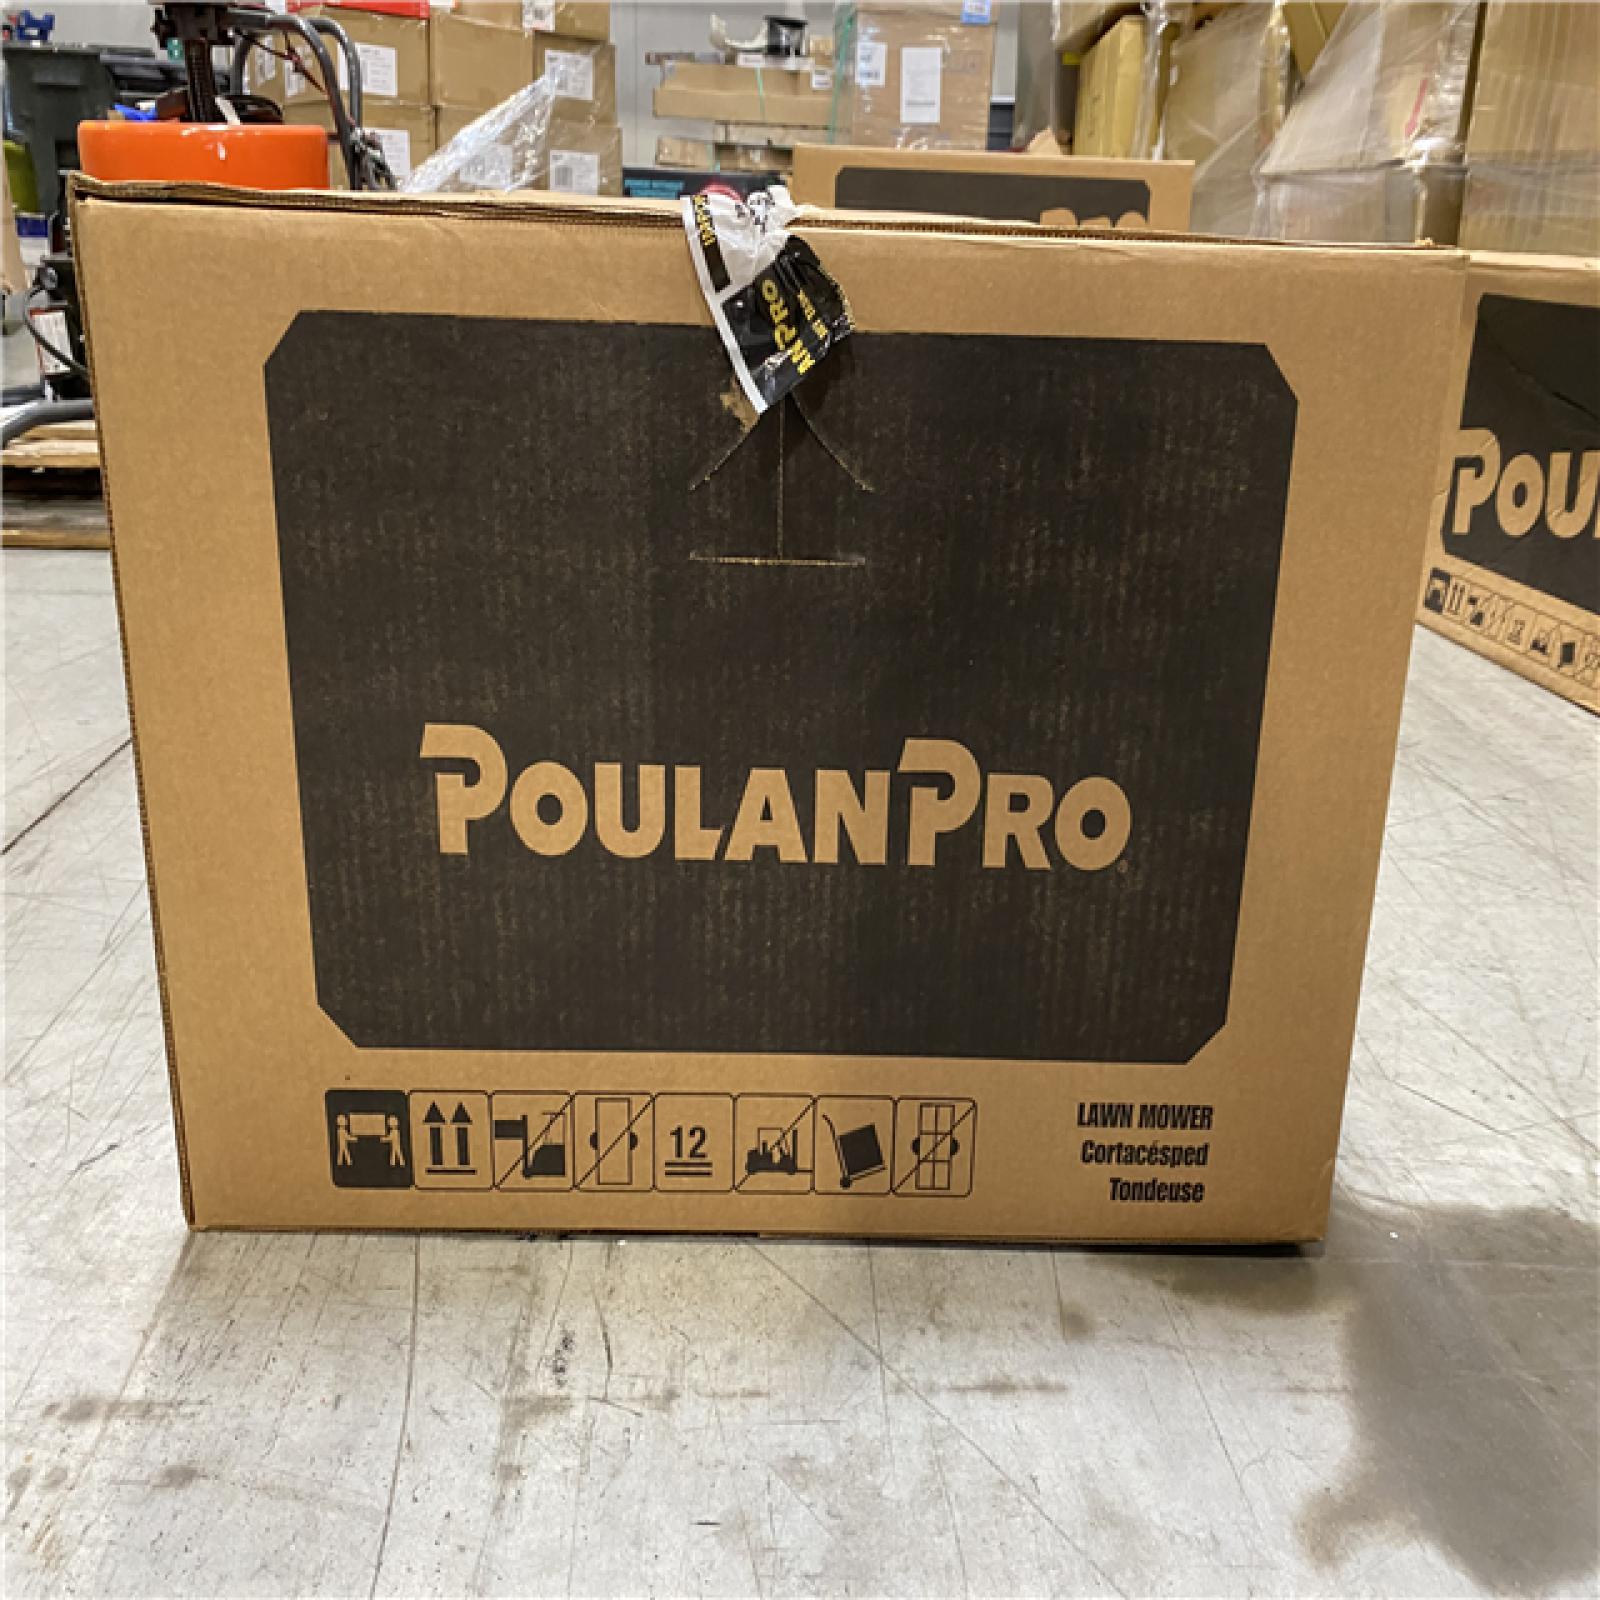 DALLAS LOCATION - New Poulan PRO 625Ex 22 in. 150 cc Briggs and Stratton Gas FWD Walk Behind 3-in 1 Self-Propelled Lawn Mower